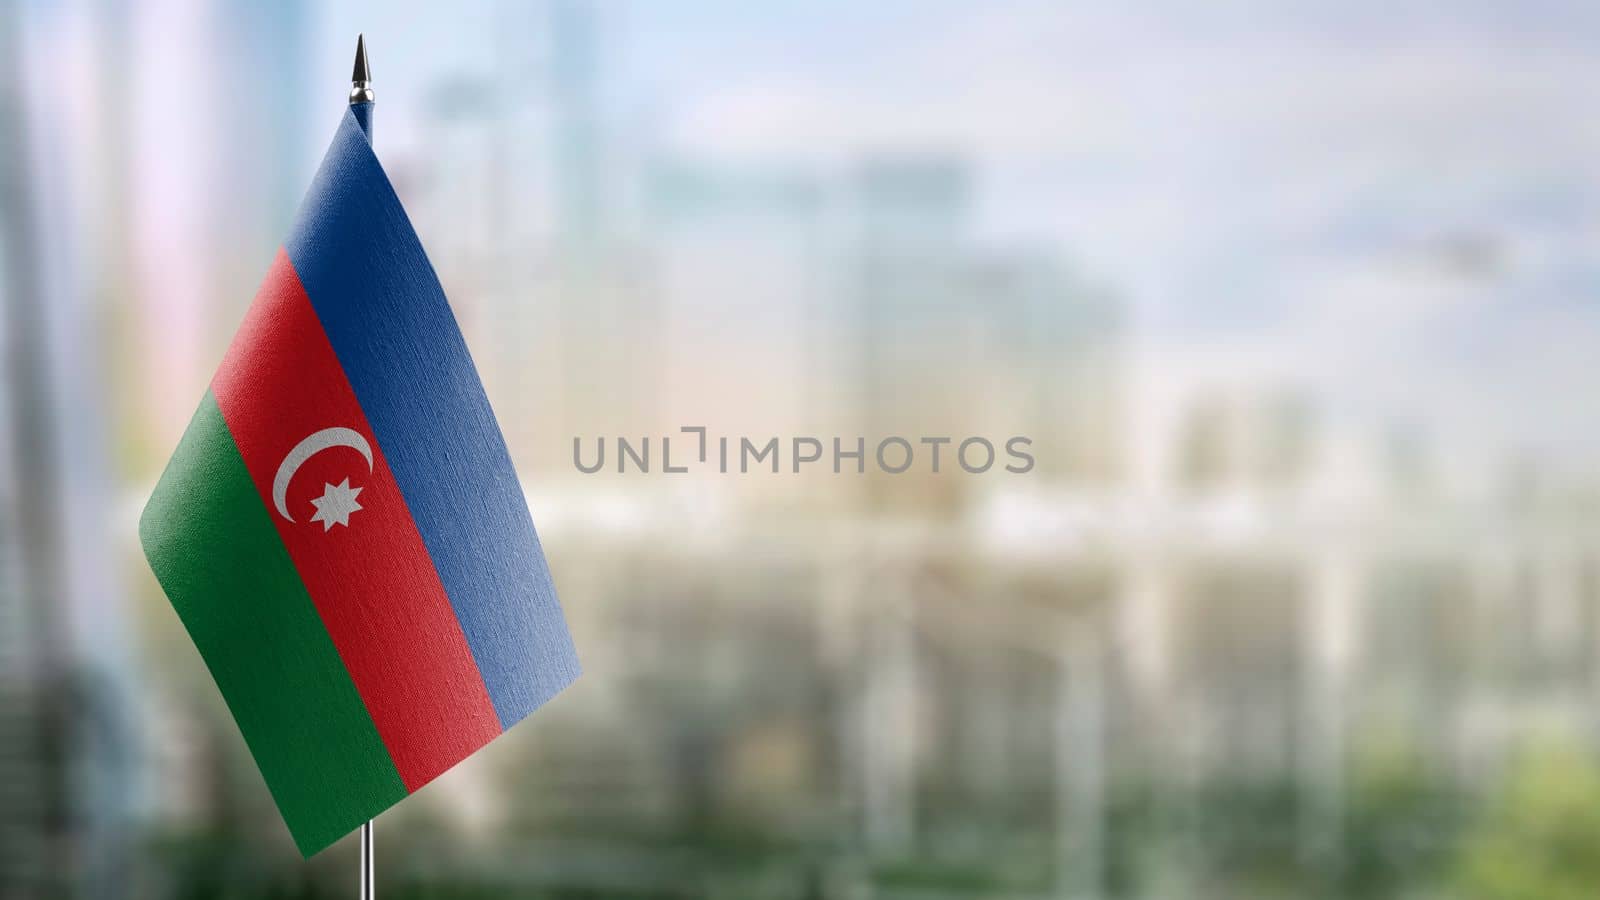 Small flags of the Azerbaijan on an abstract blurry background by butenkow